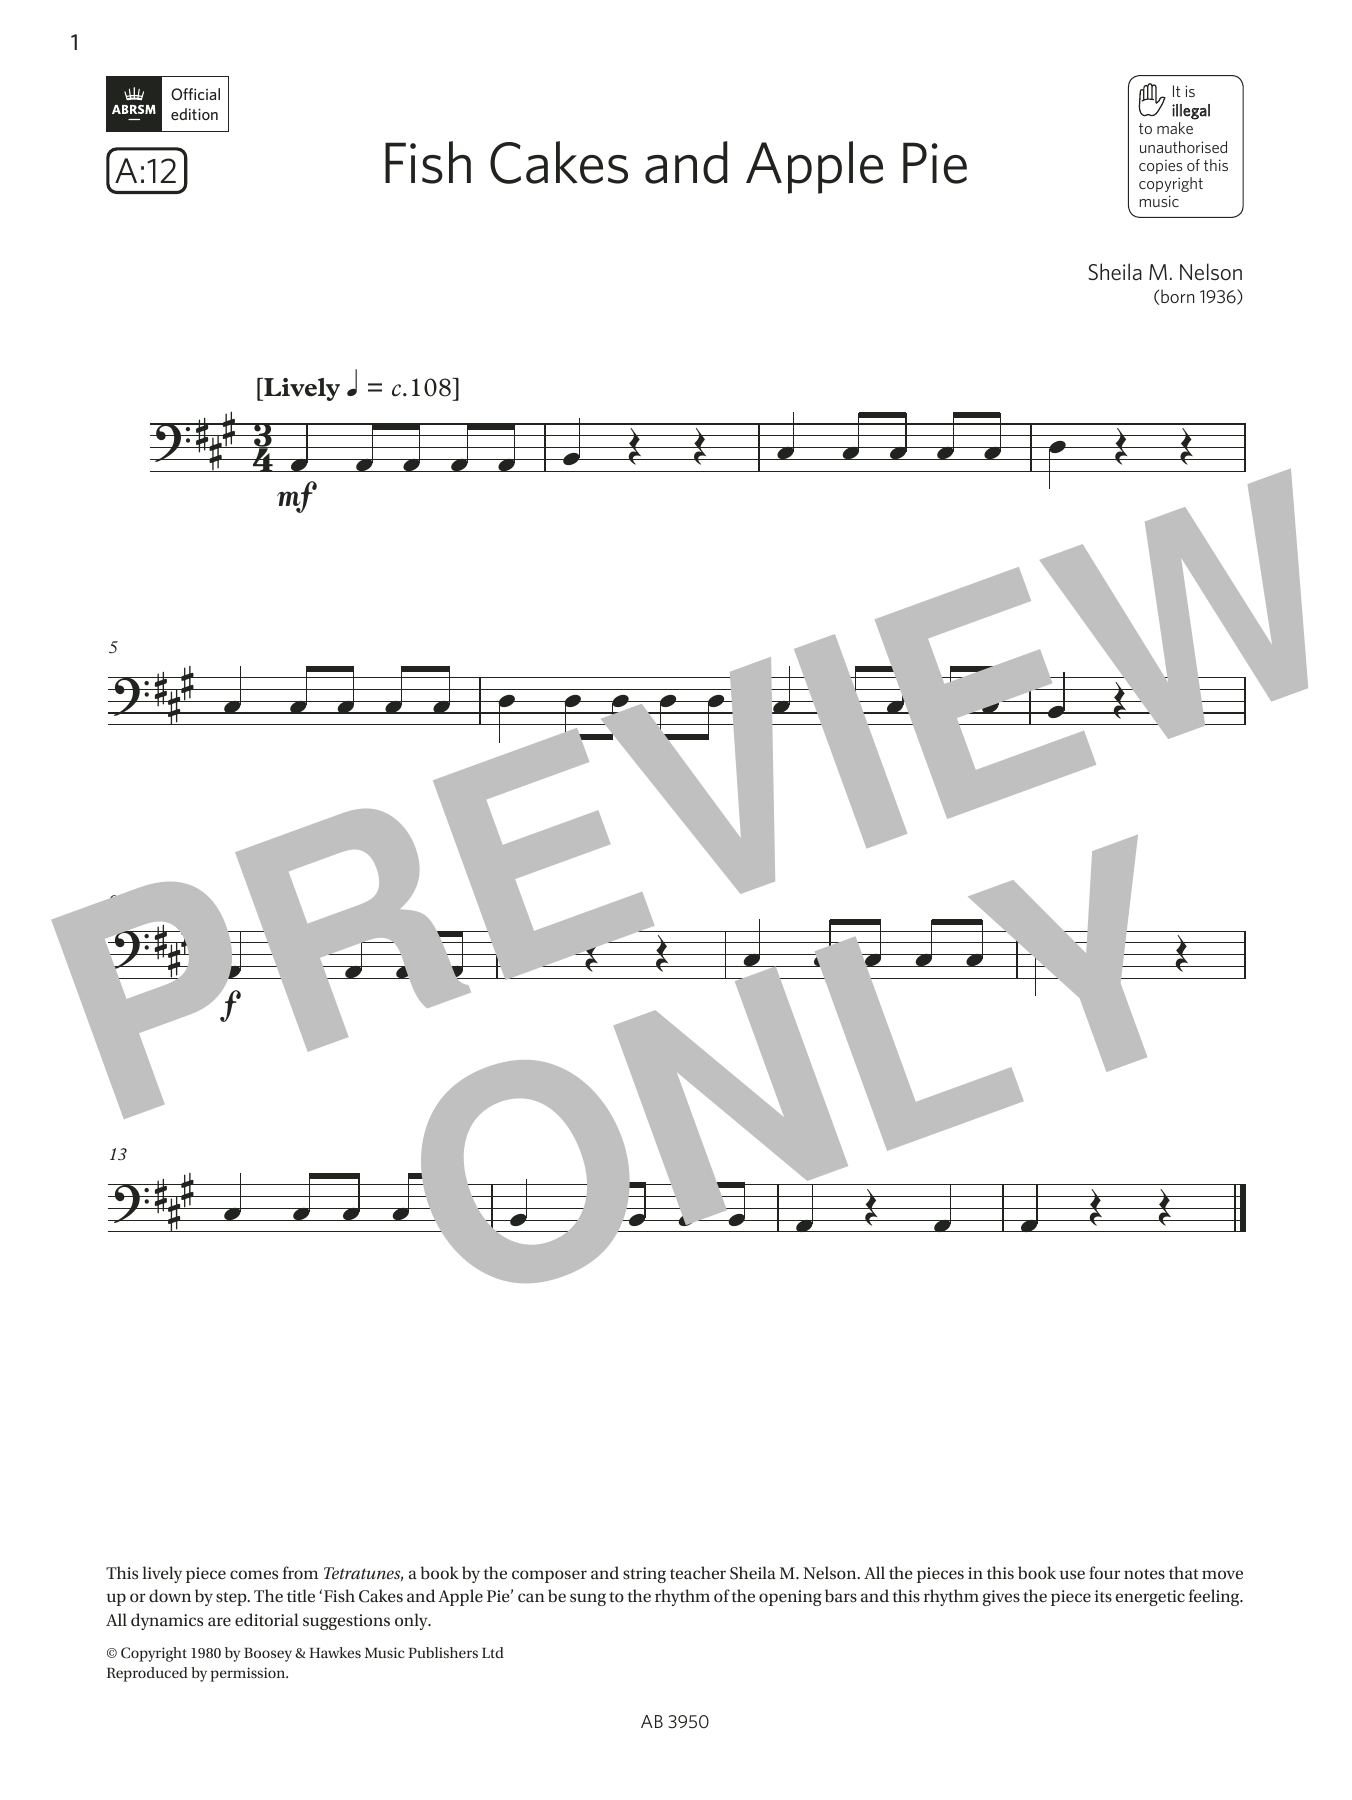 Download Sheila M. Nelson Fish Cakes and Apple Pie (Grade Initial Sheet Music